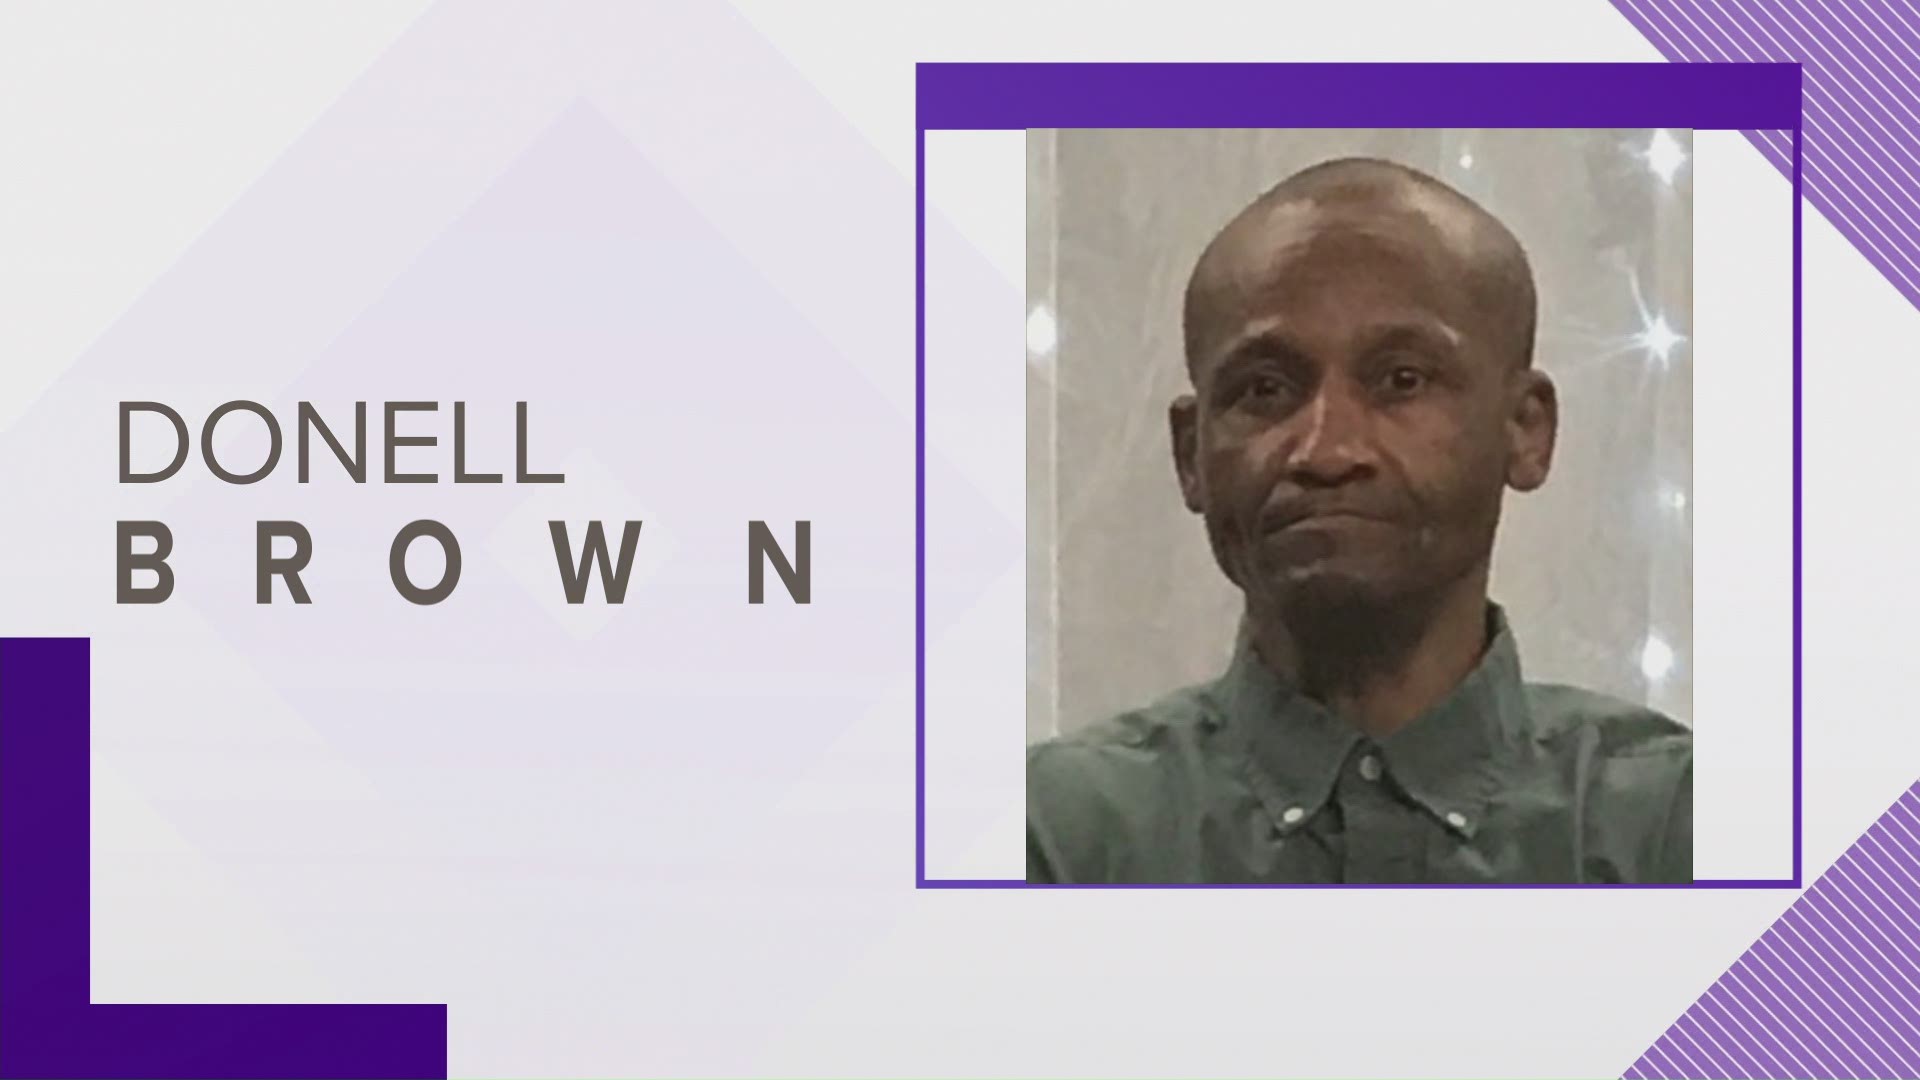 56-year-old Donell Brown was last seen walking on Songbird Lane in St. Matthews around 1:40 a.m. on Saturday, April 24.